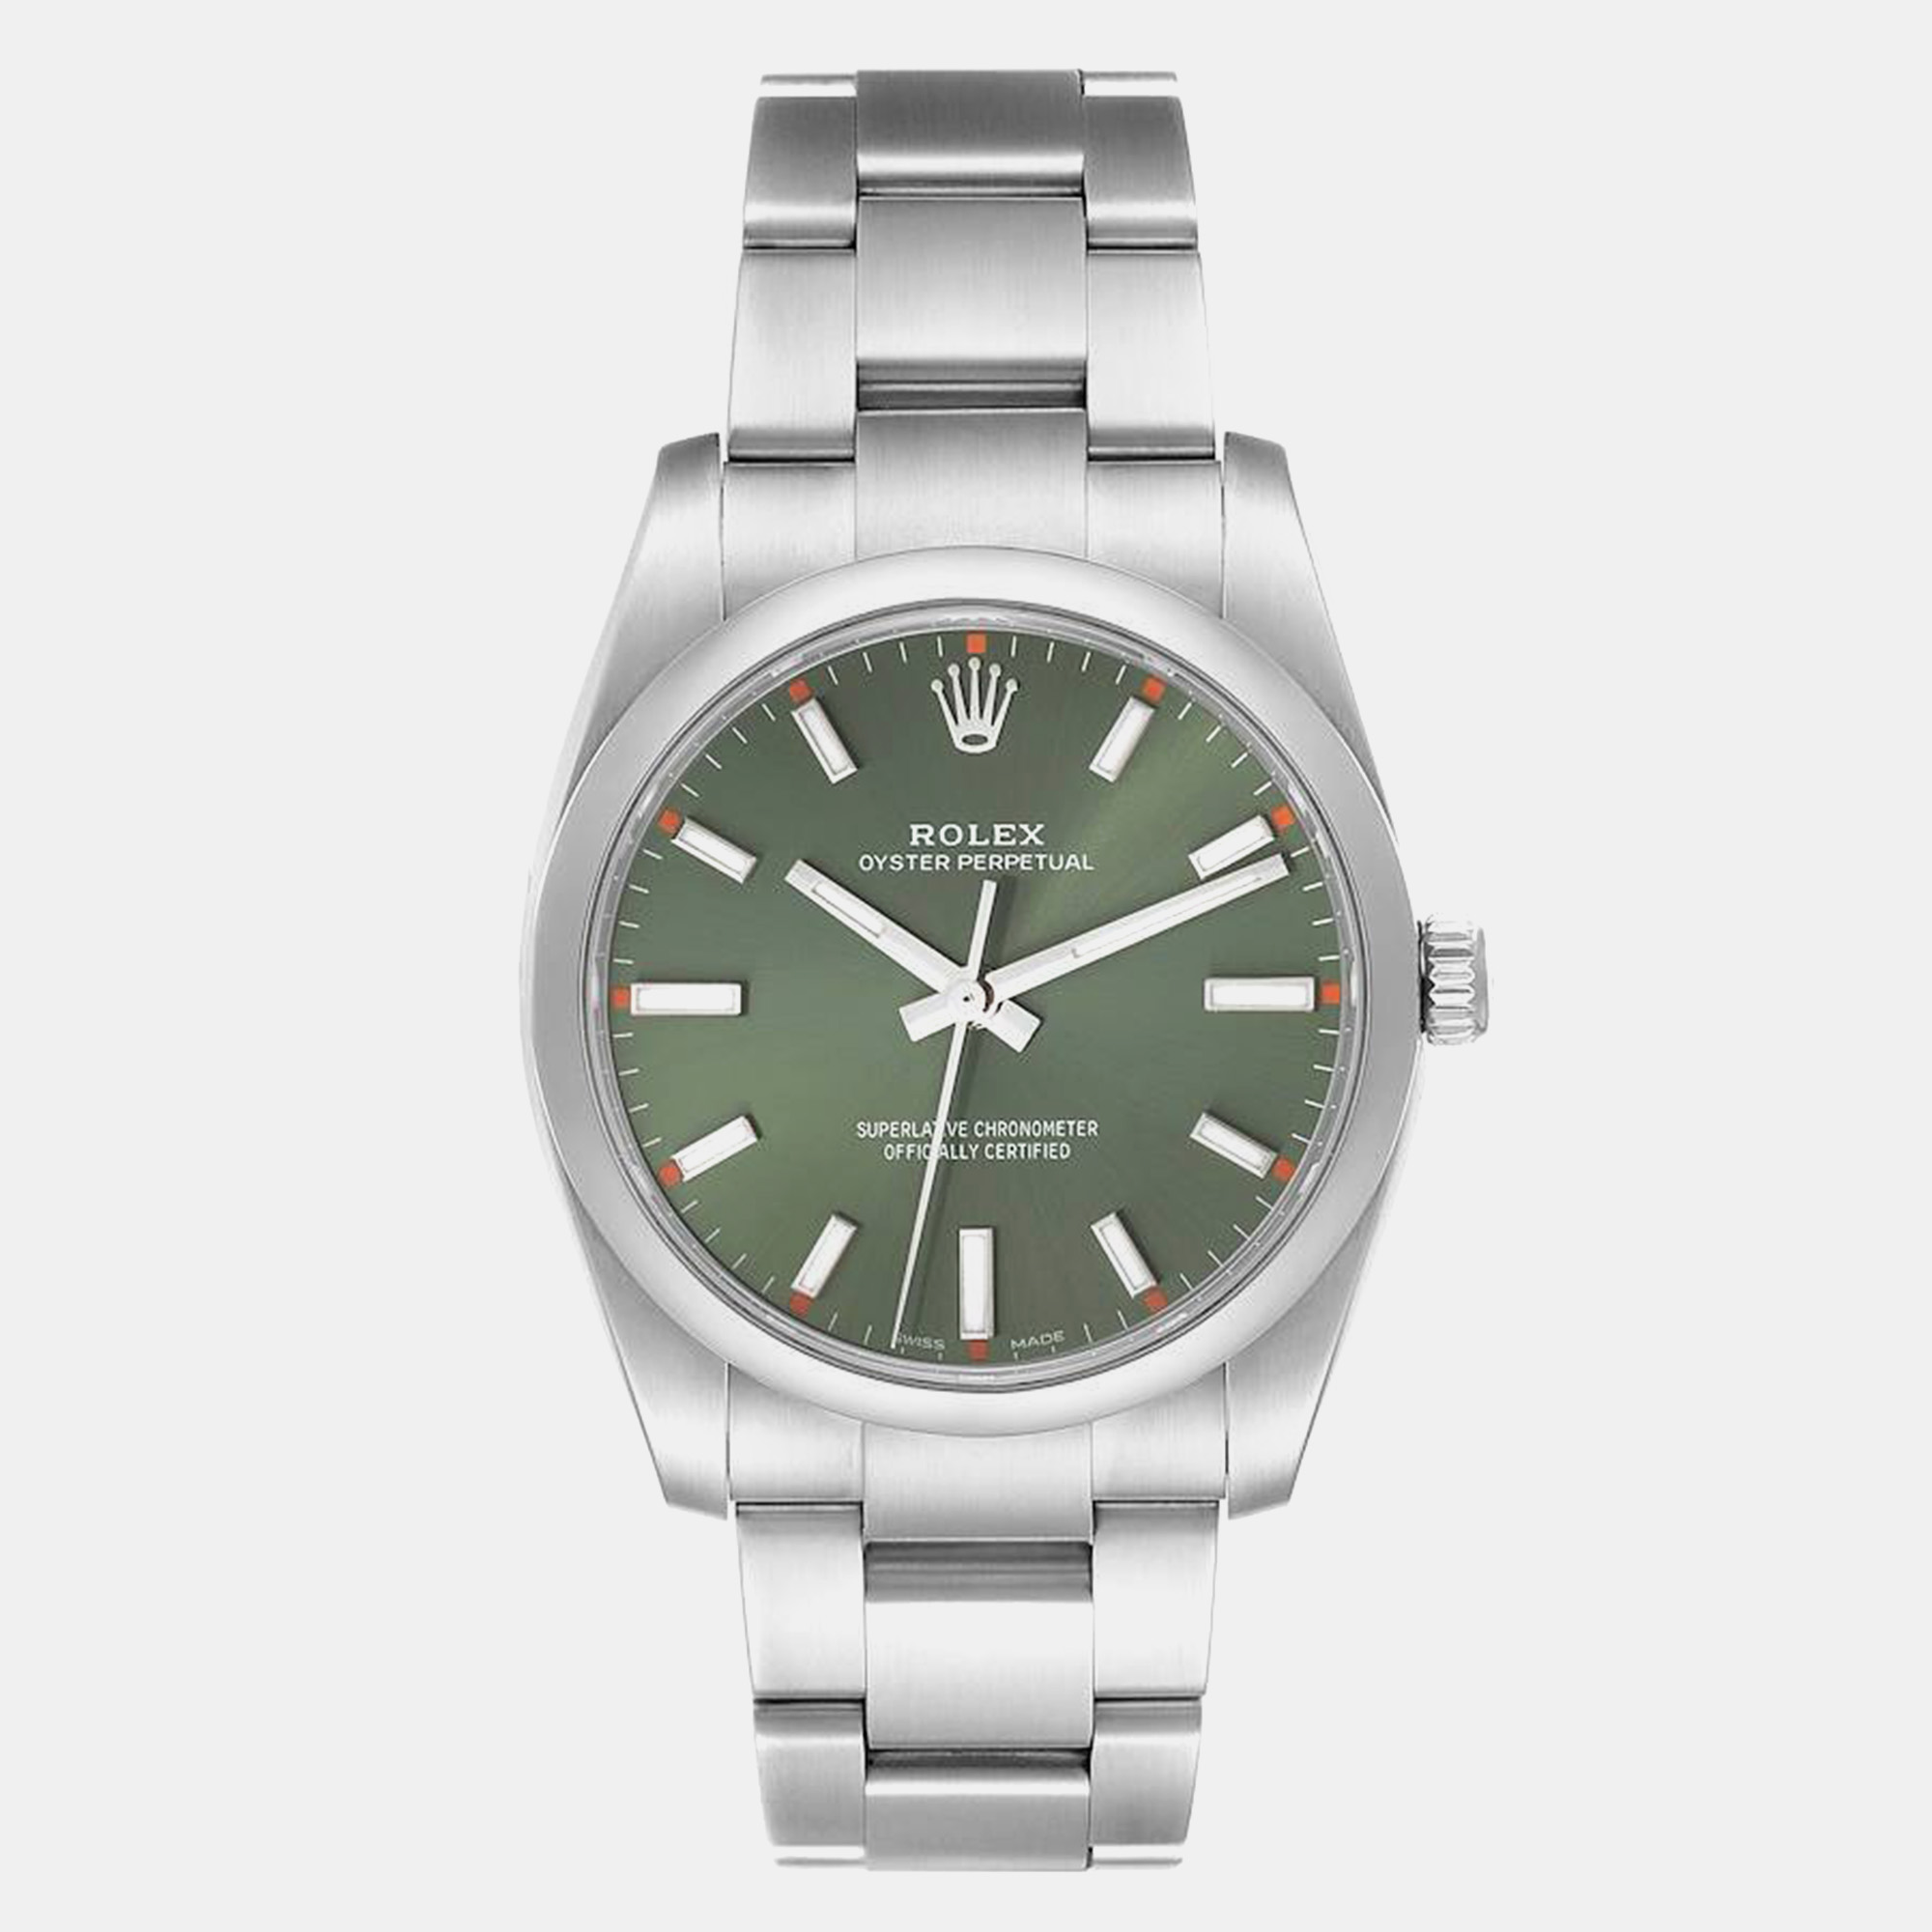 Rolex oyster perpetual olive green dial steel mens watch 114200 34 mm